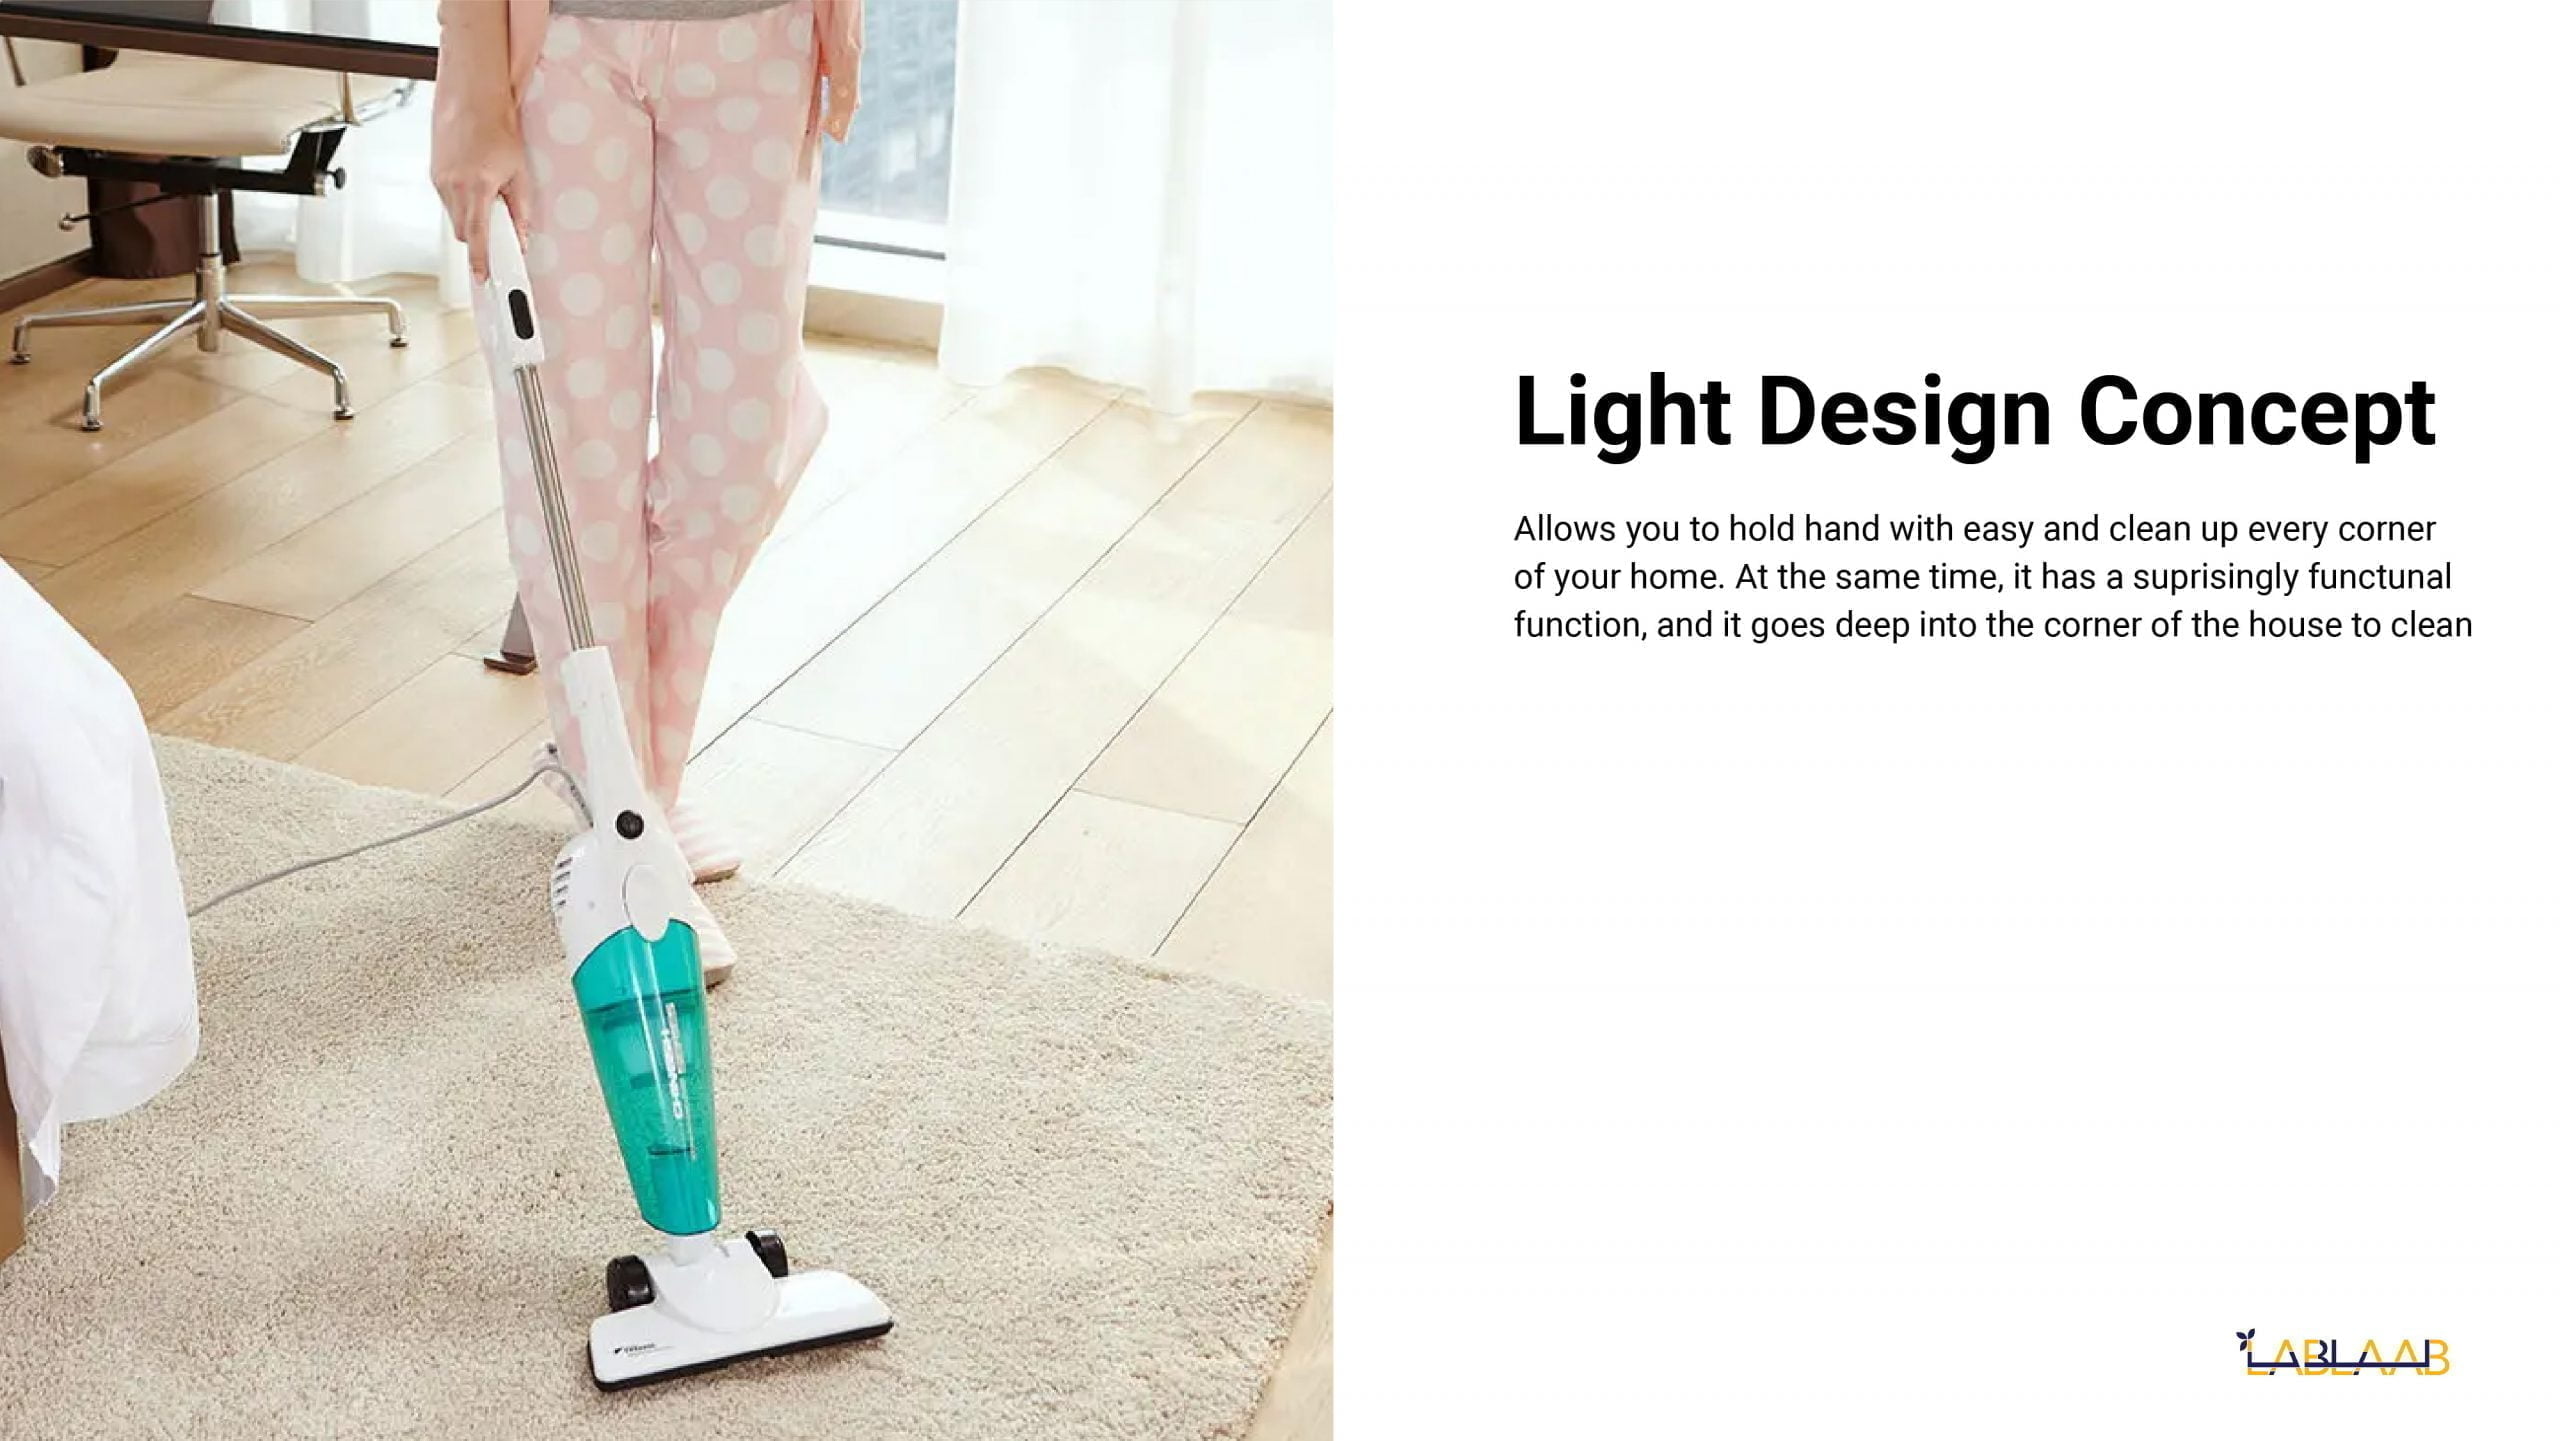 Vacuum 333 02 Scaled Xiaomi Deerma Dx118C Upright Vacuum Cleaner Mini 2-In-1 Pushrod Handheld Cleaner With 16000Pa Super Suction- Green Https://Www.youtube.com/Watch?V=A4_Ujrhyw_I Deerma Dx118C Vacuum Cleaner Deerma Dx118C Vacuum Cleaner 2-In-1 Pushrod Handheld Cleaner With 16000Pa Super Suction